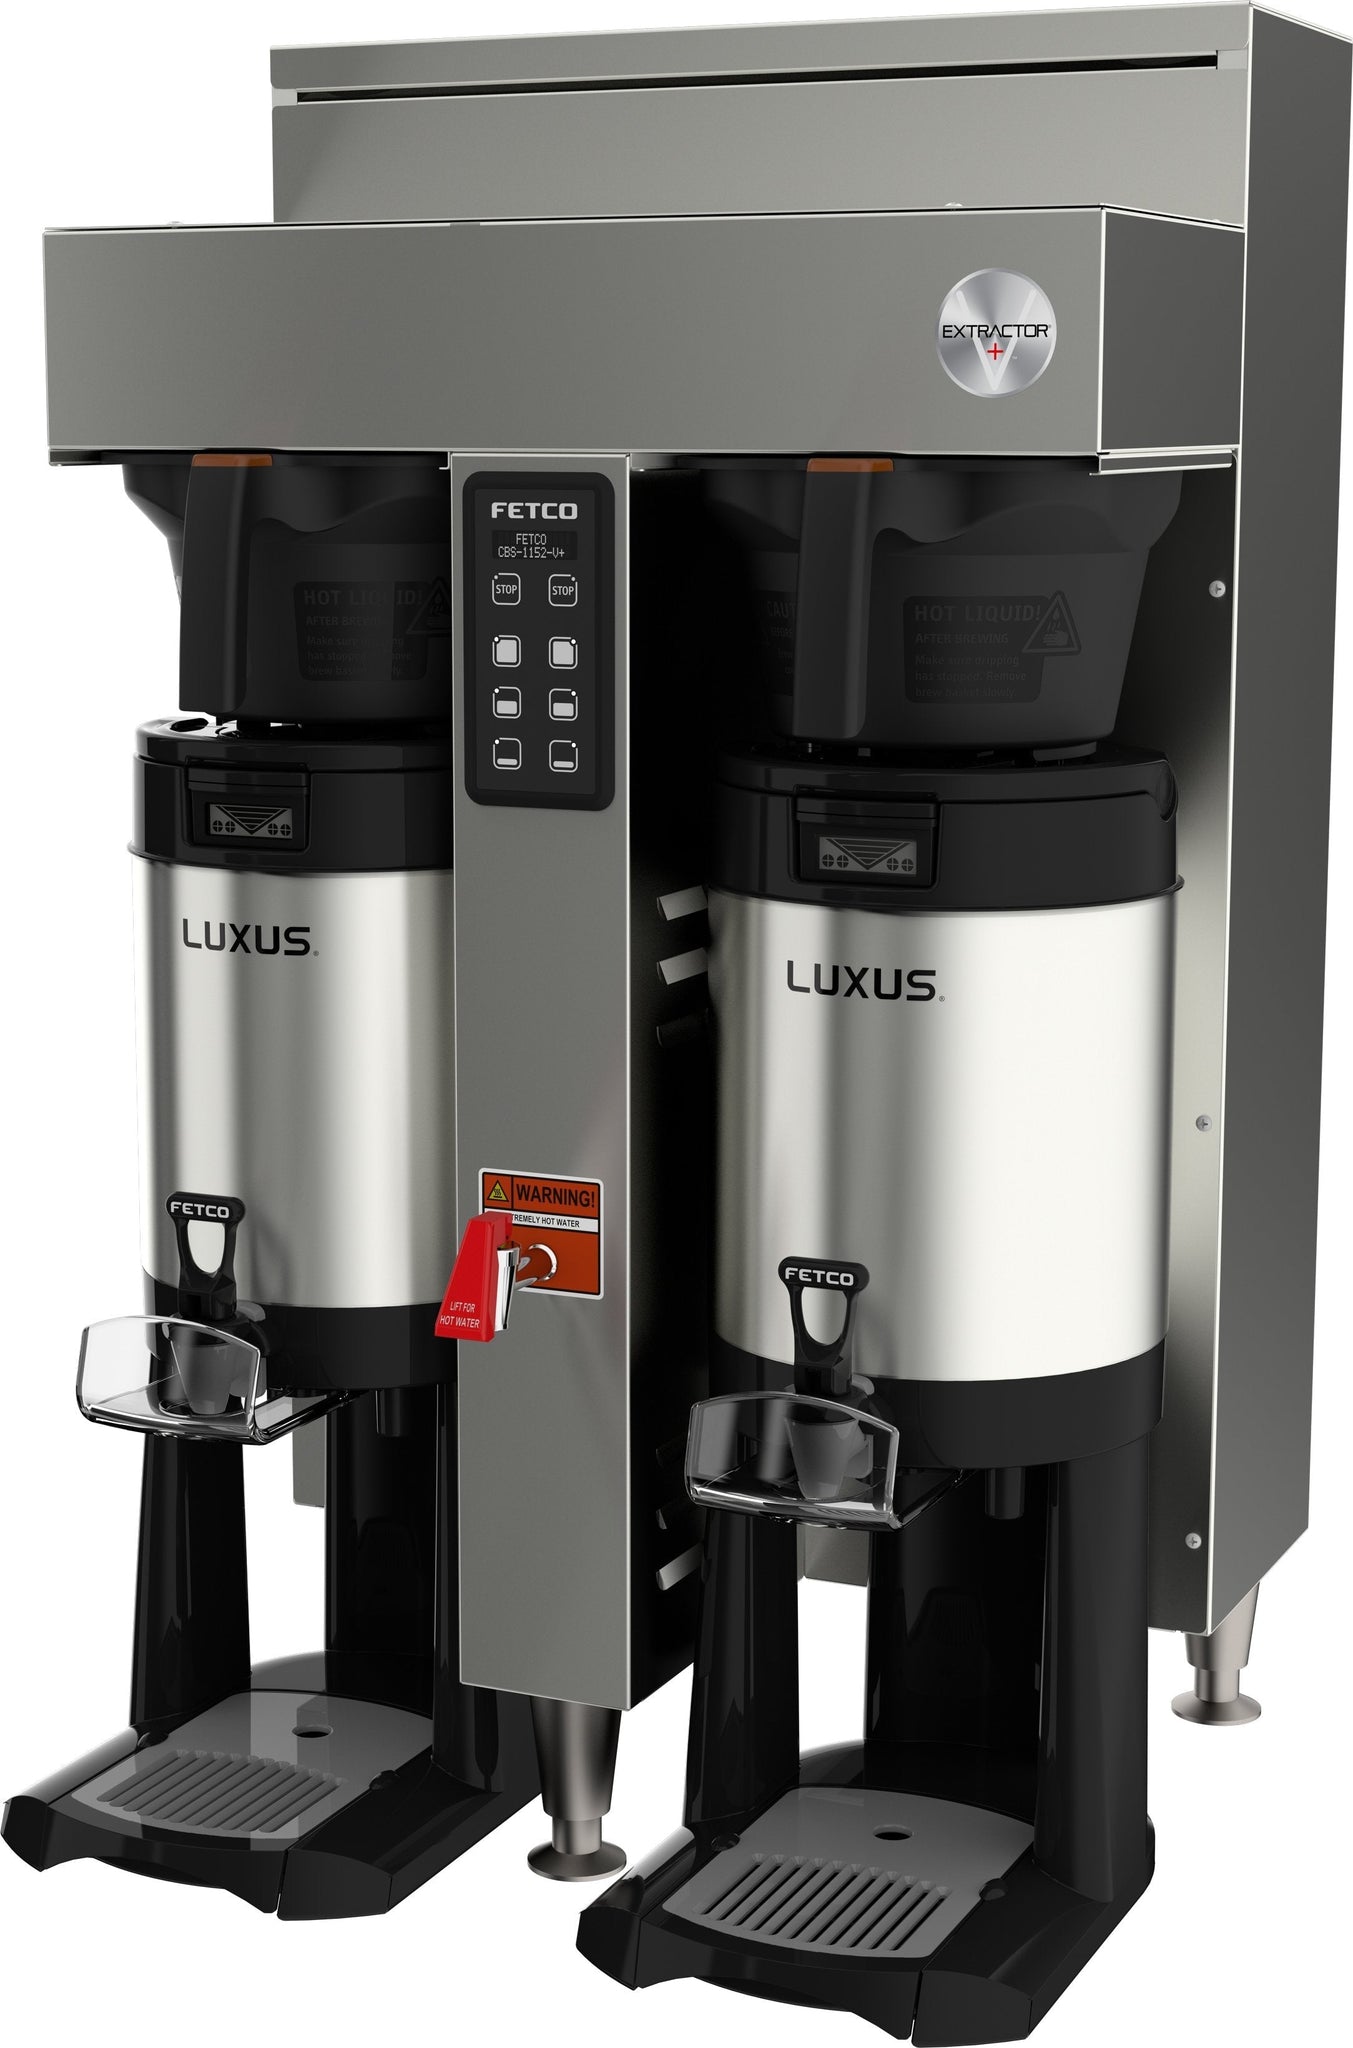 Fetco - Extractor Series Double Station Coffee Brewer 3 x 3.0 kW with Metal Brew Basket - CBS-1152V+